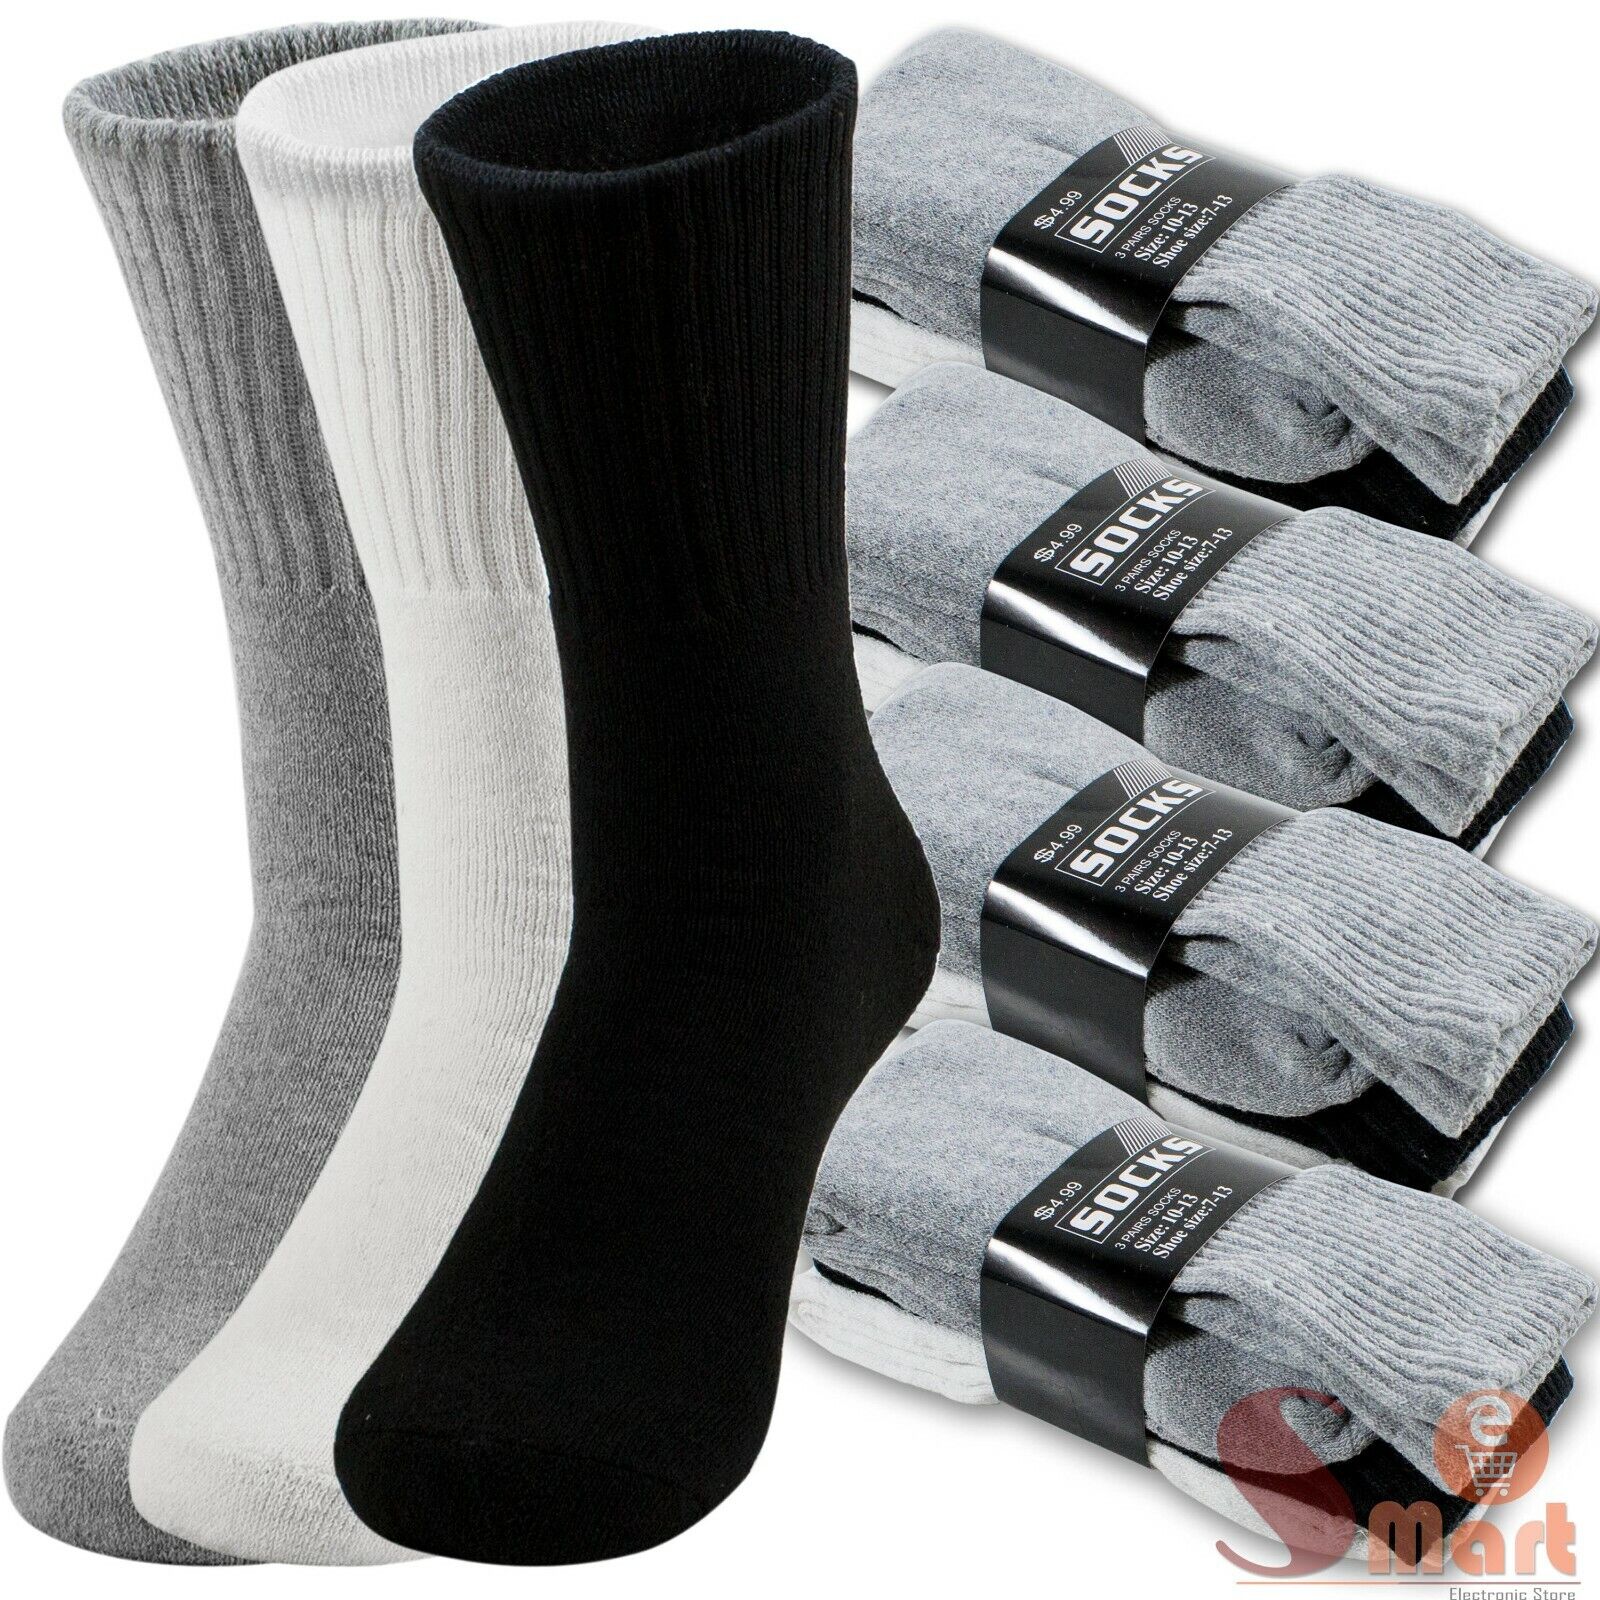 S Solid Sports Athletic Work Plain Crew Socks Size 9-11 10-1